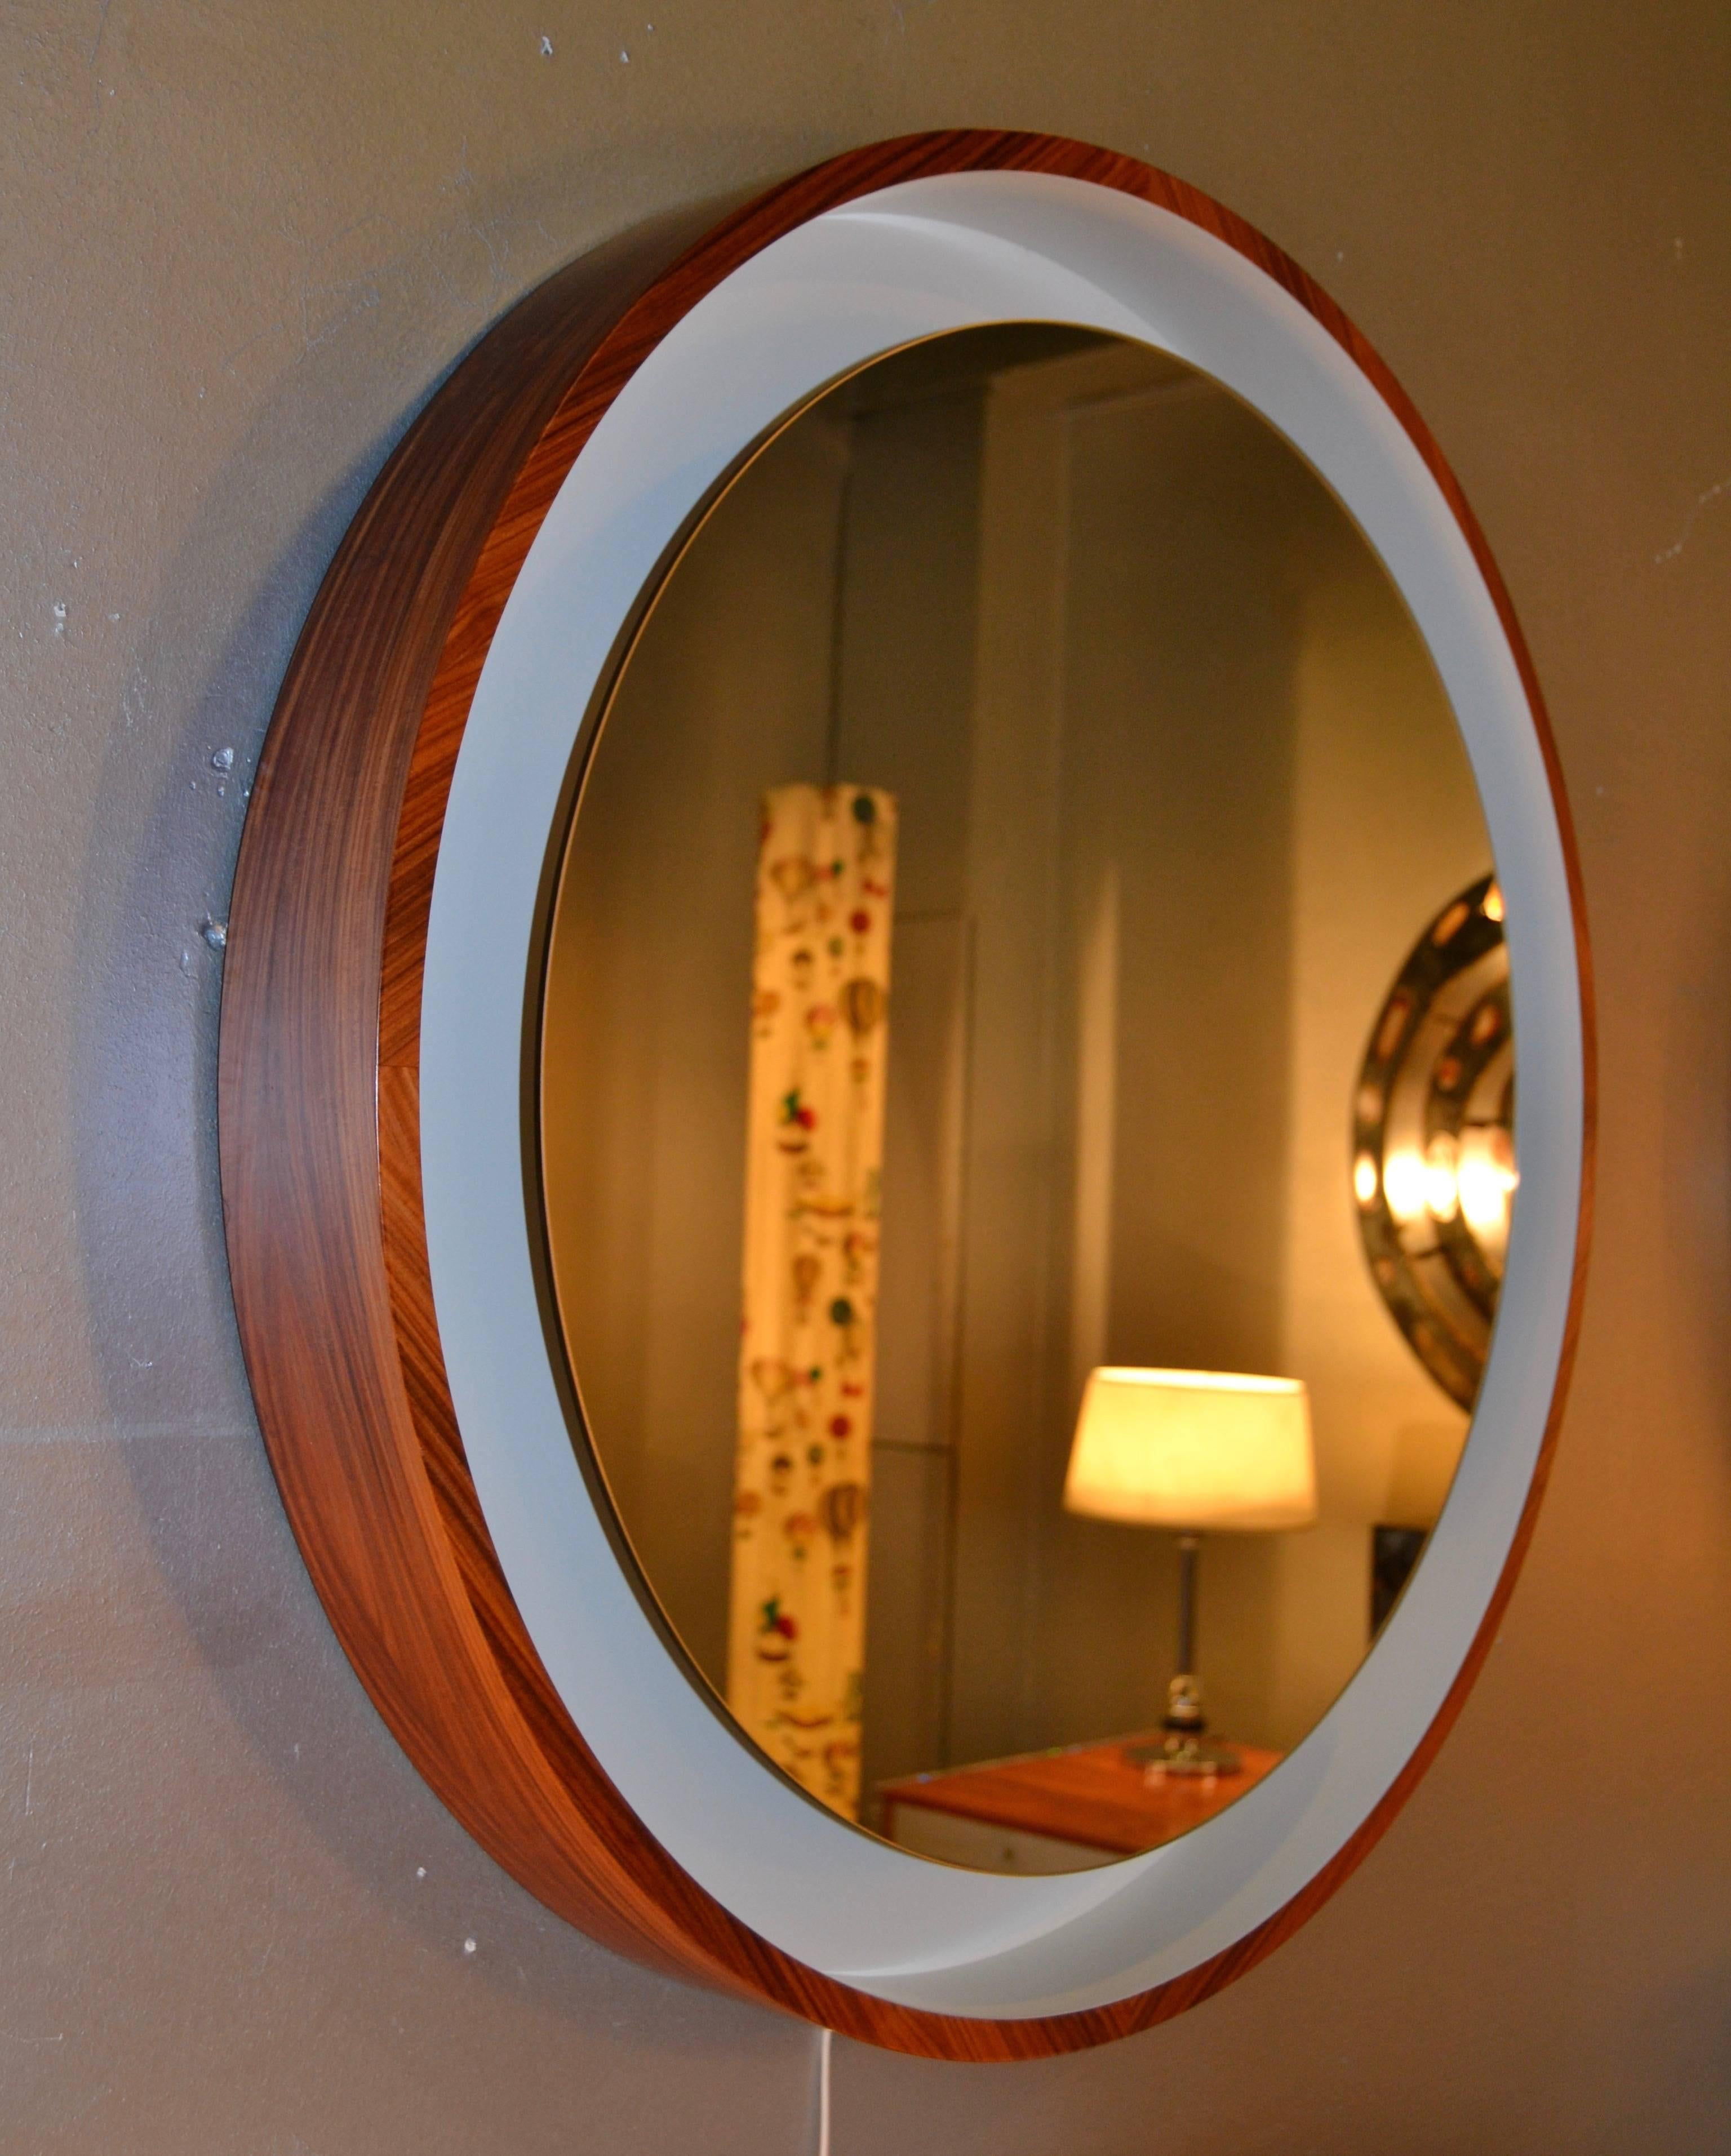 1960s lighted rosewood frame mirror with white interior
Mirrors has been rewired
Great condition.
1 piece available